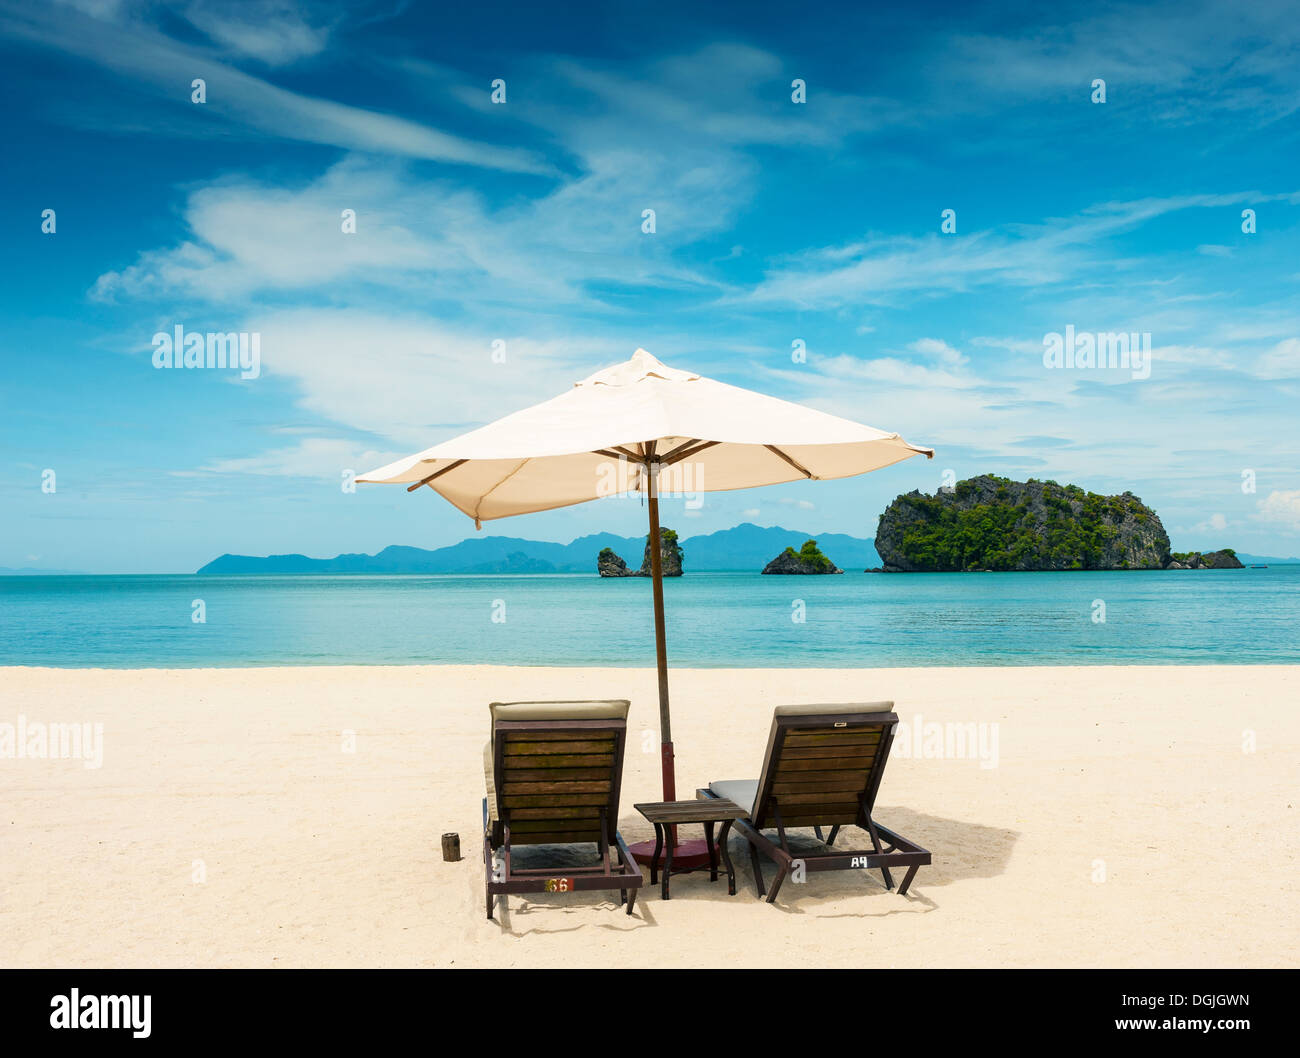 Two sunloungers and an umbrella on Tanjung Rhu beach in Langkawi. Stock Photo